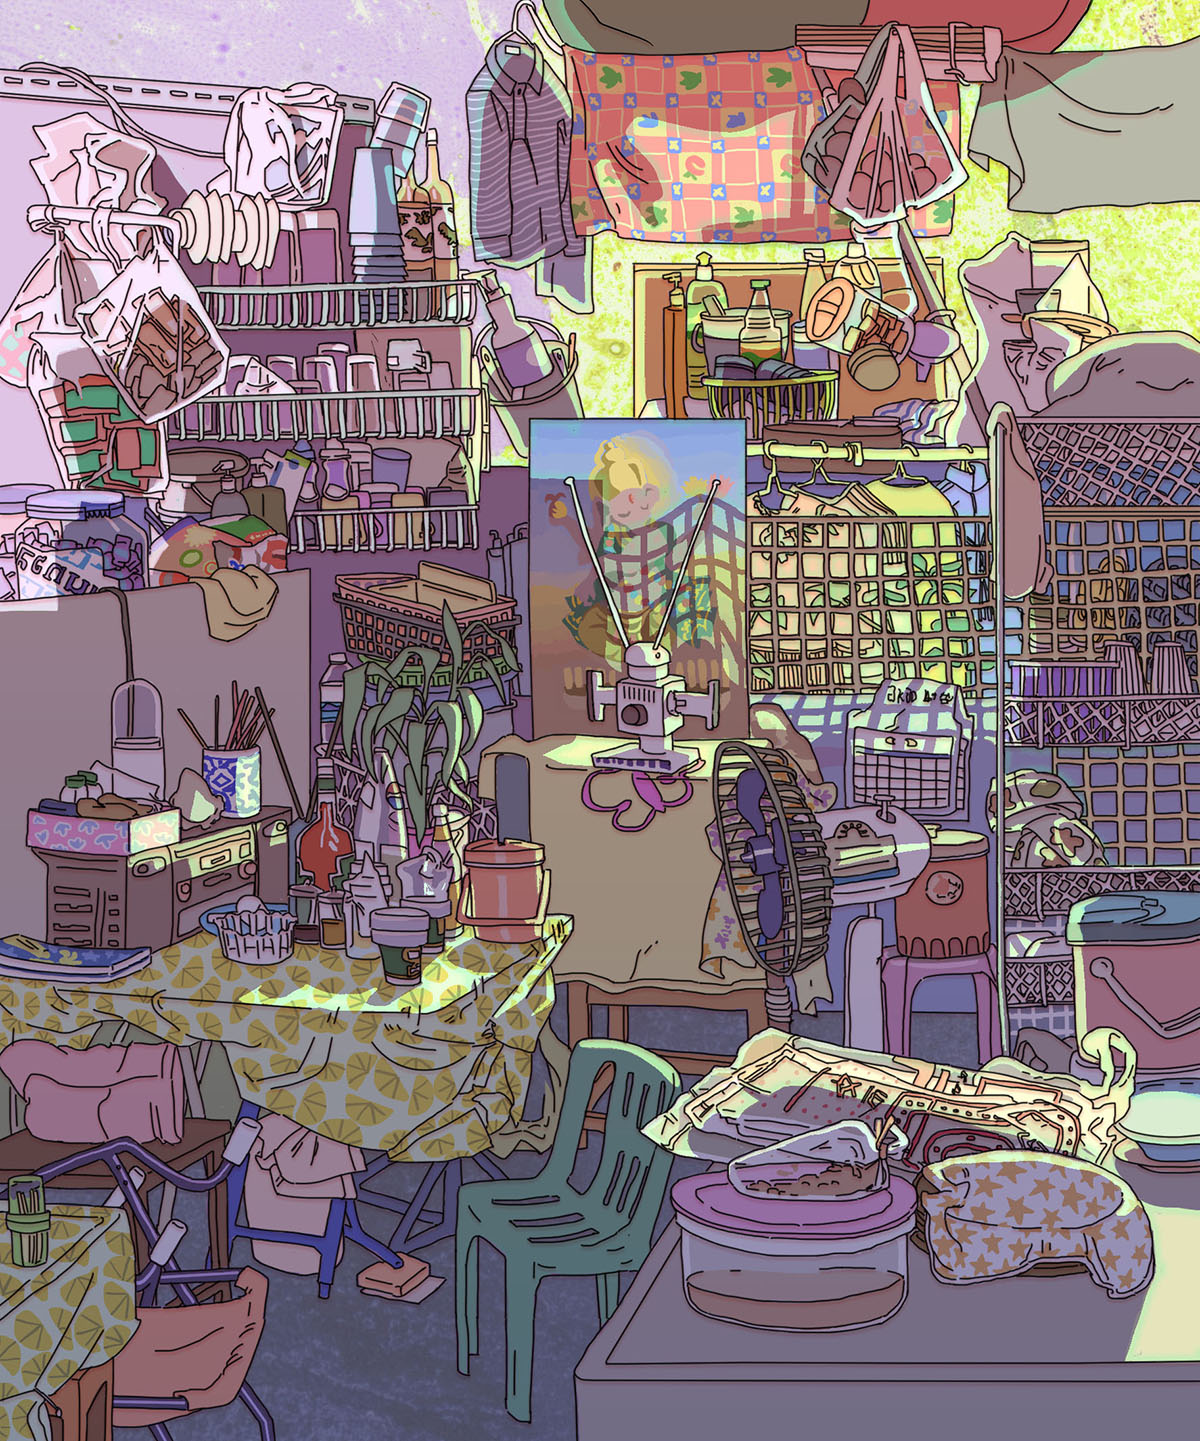 Bright, high detailed illustration of a cluttered market scene with pantry items covered floor to wall, dramatic lighting casting expressive shadows across items